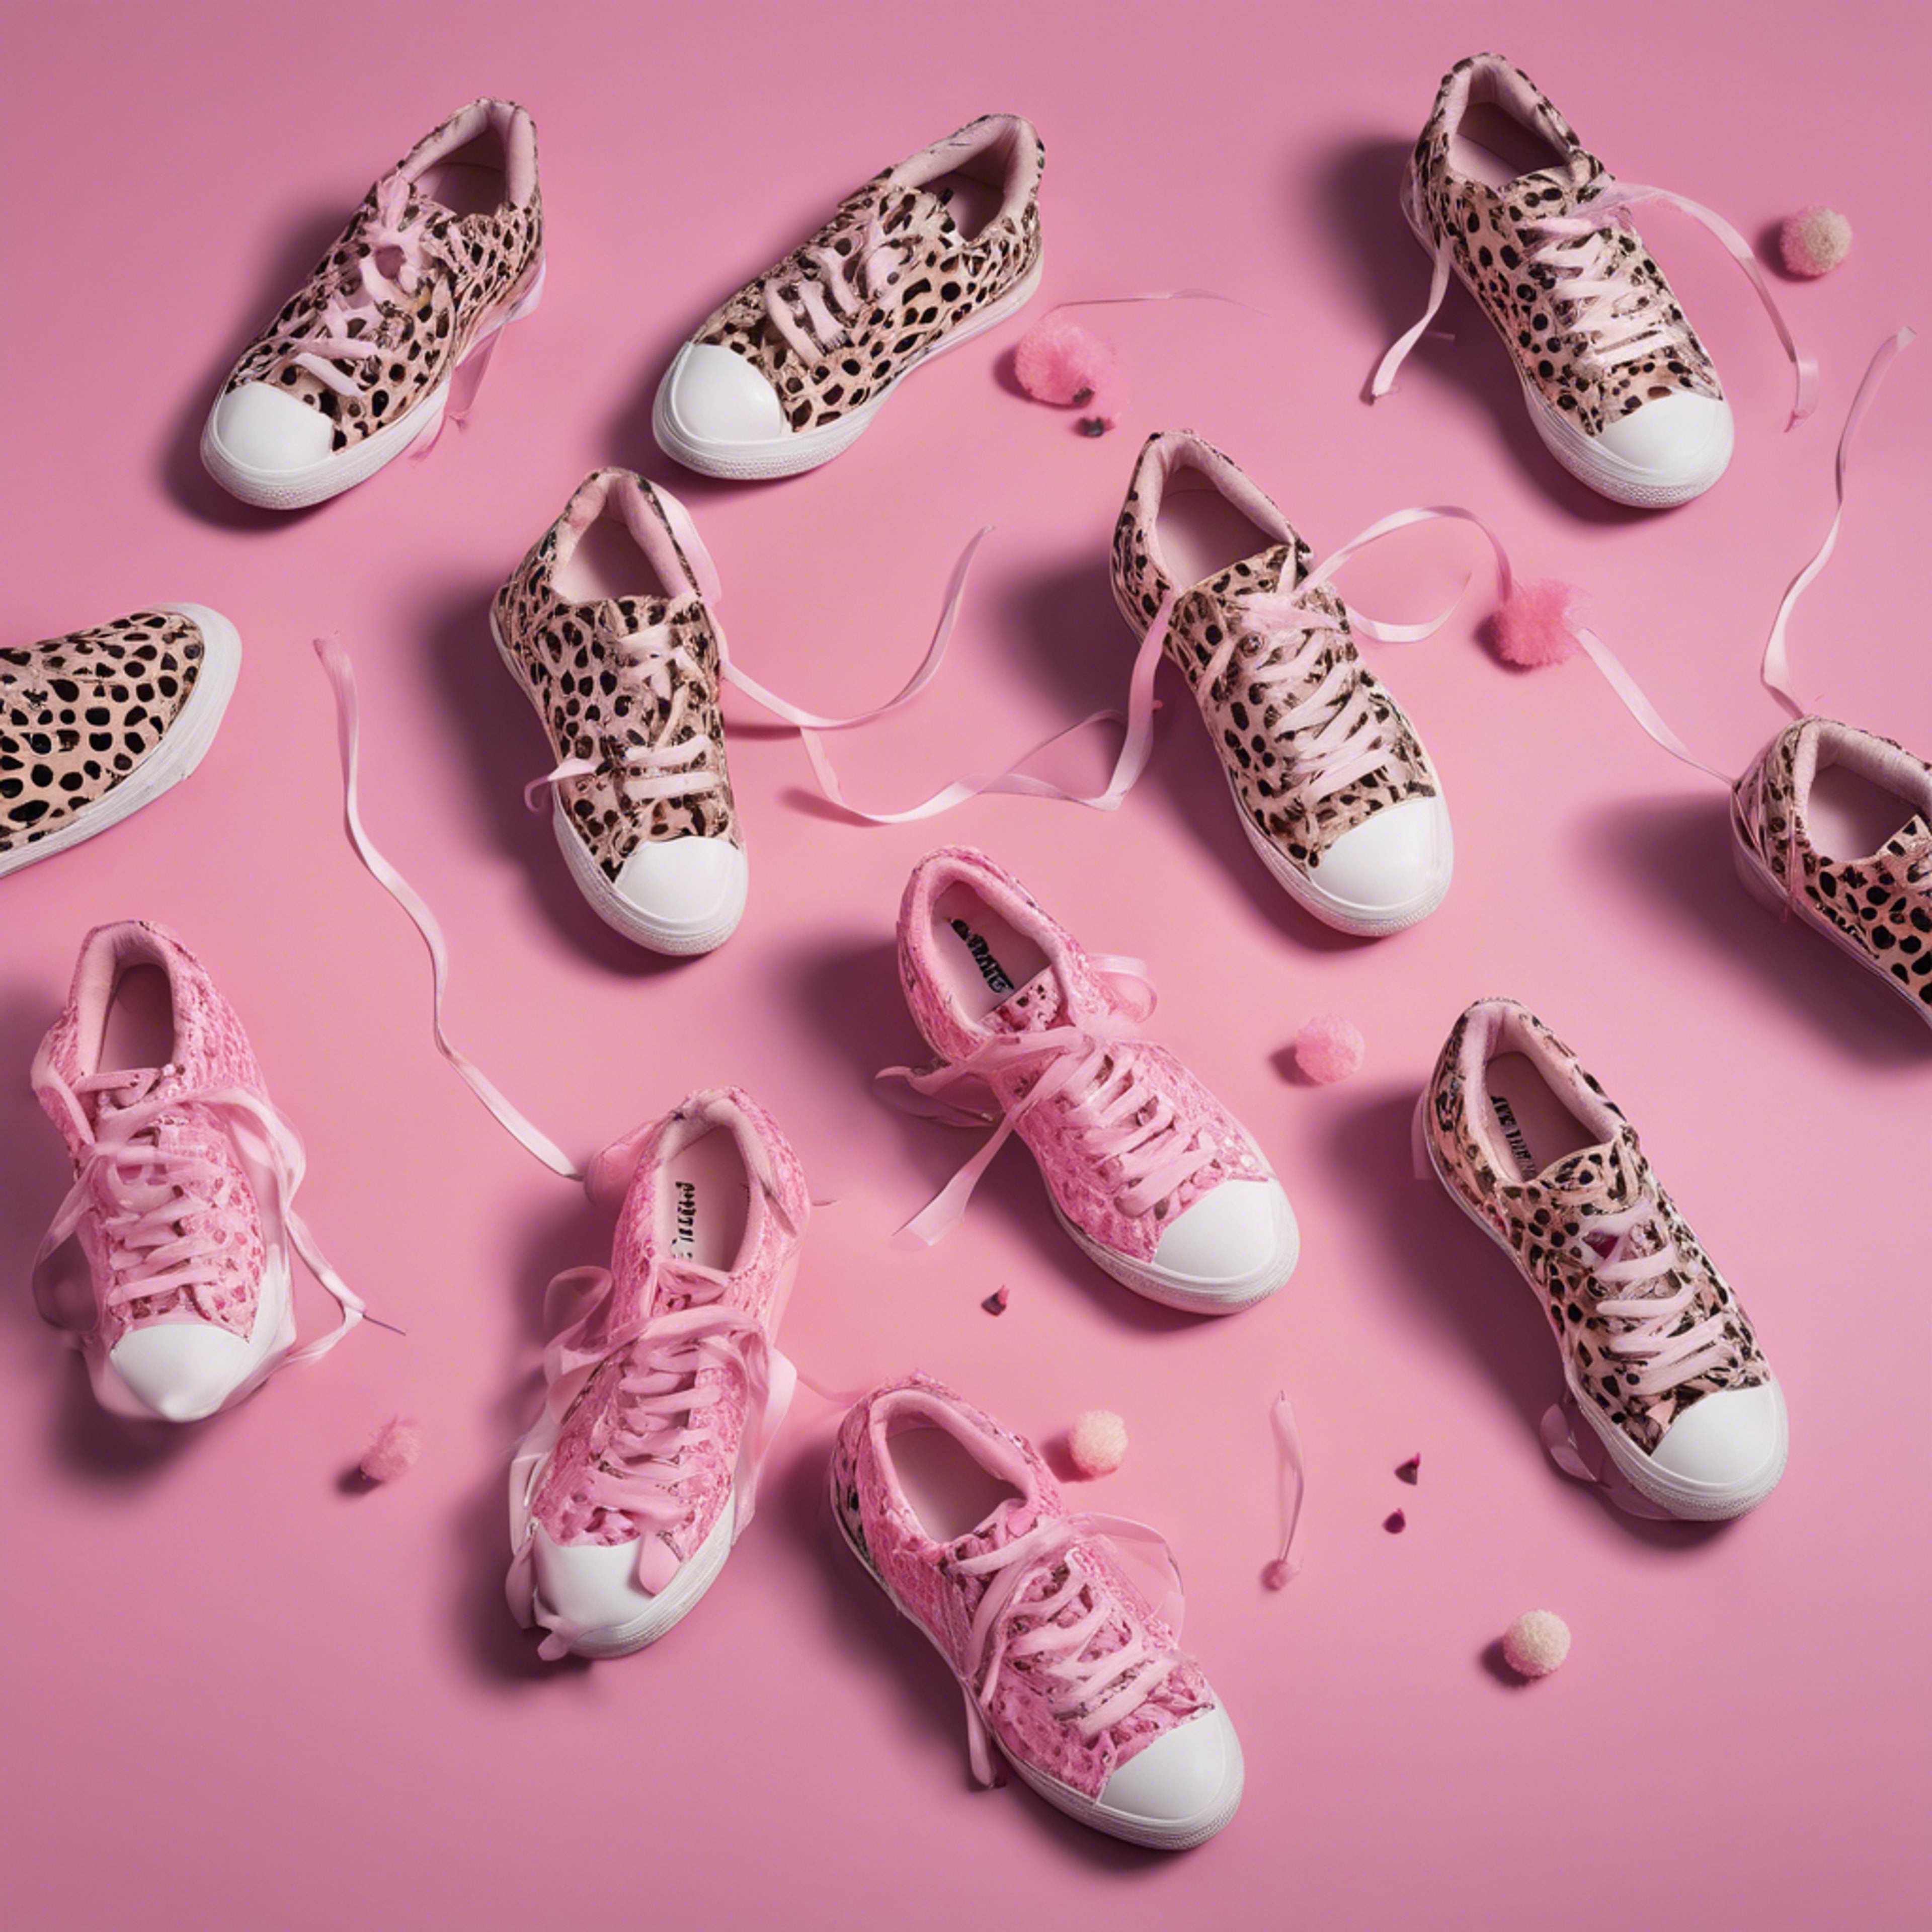 An aerial view of a pair of tennis shoes with a girly pink cheetah pattern. 牆紙[69b37b649749417cbf35]